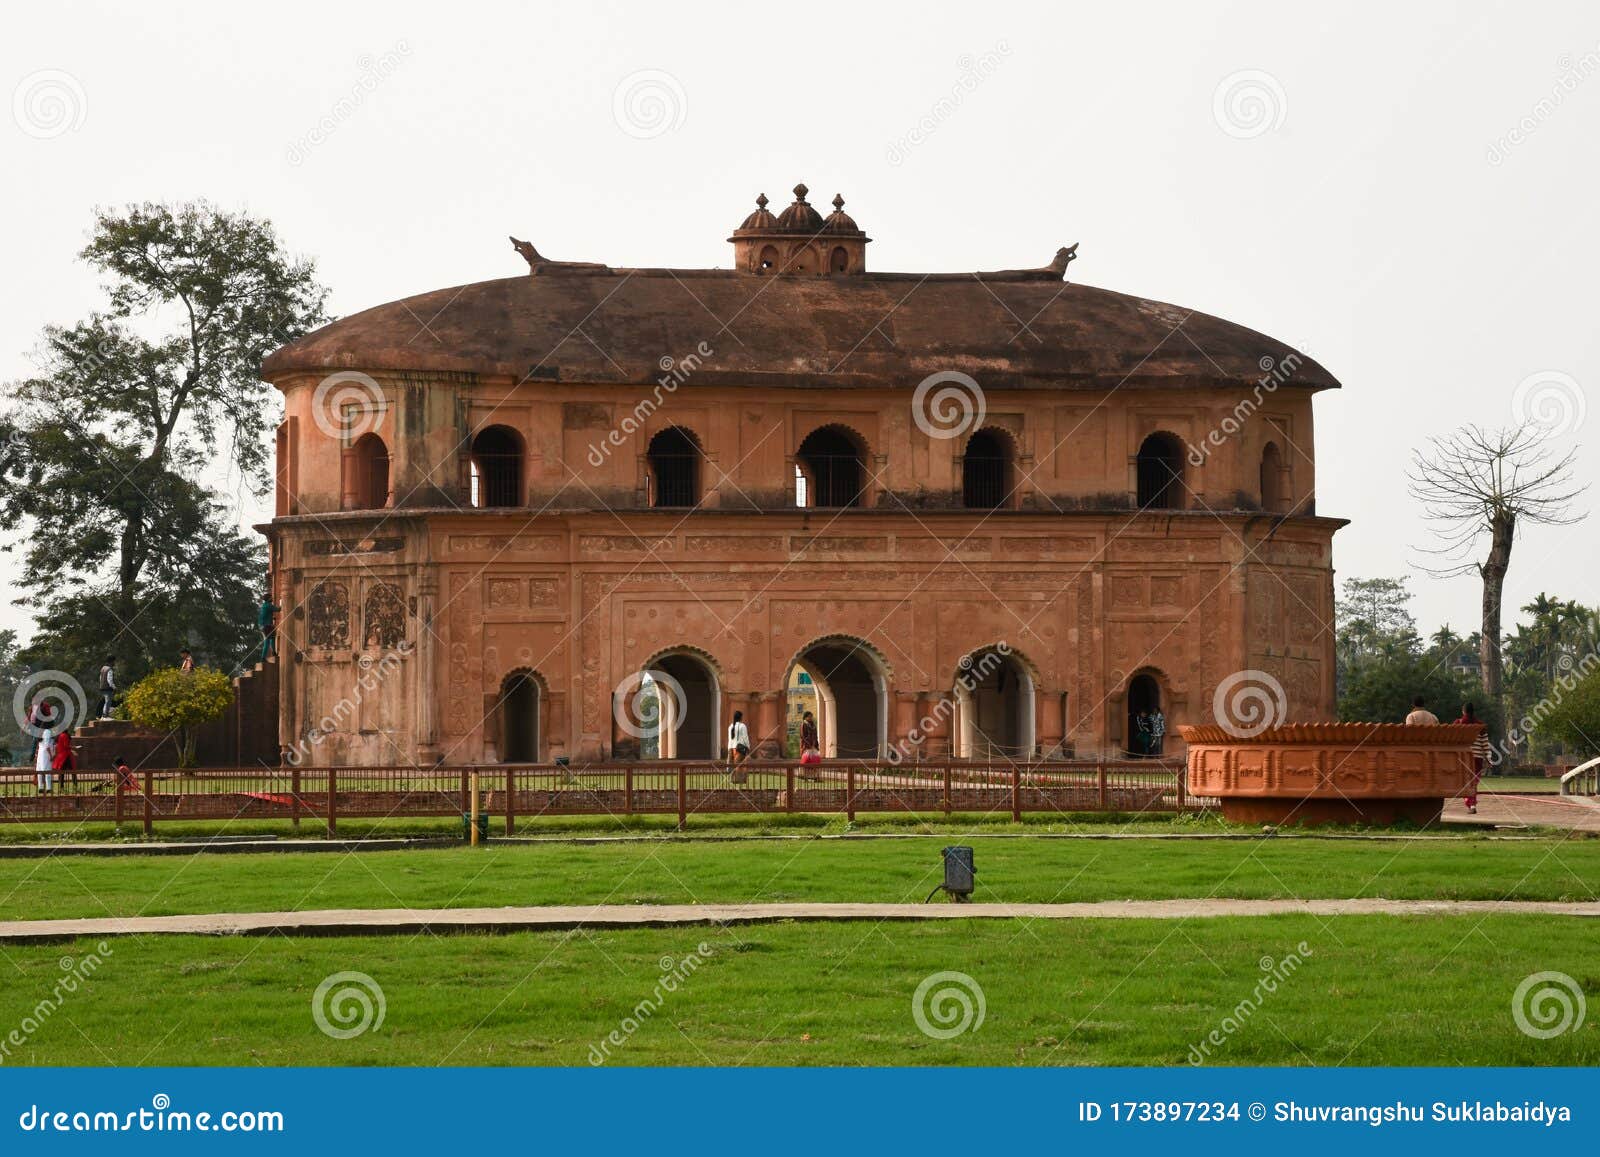 the rang ghar is a two-storeyed building which once served as the royal sports- pavilion.